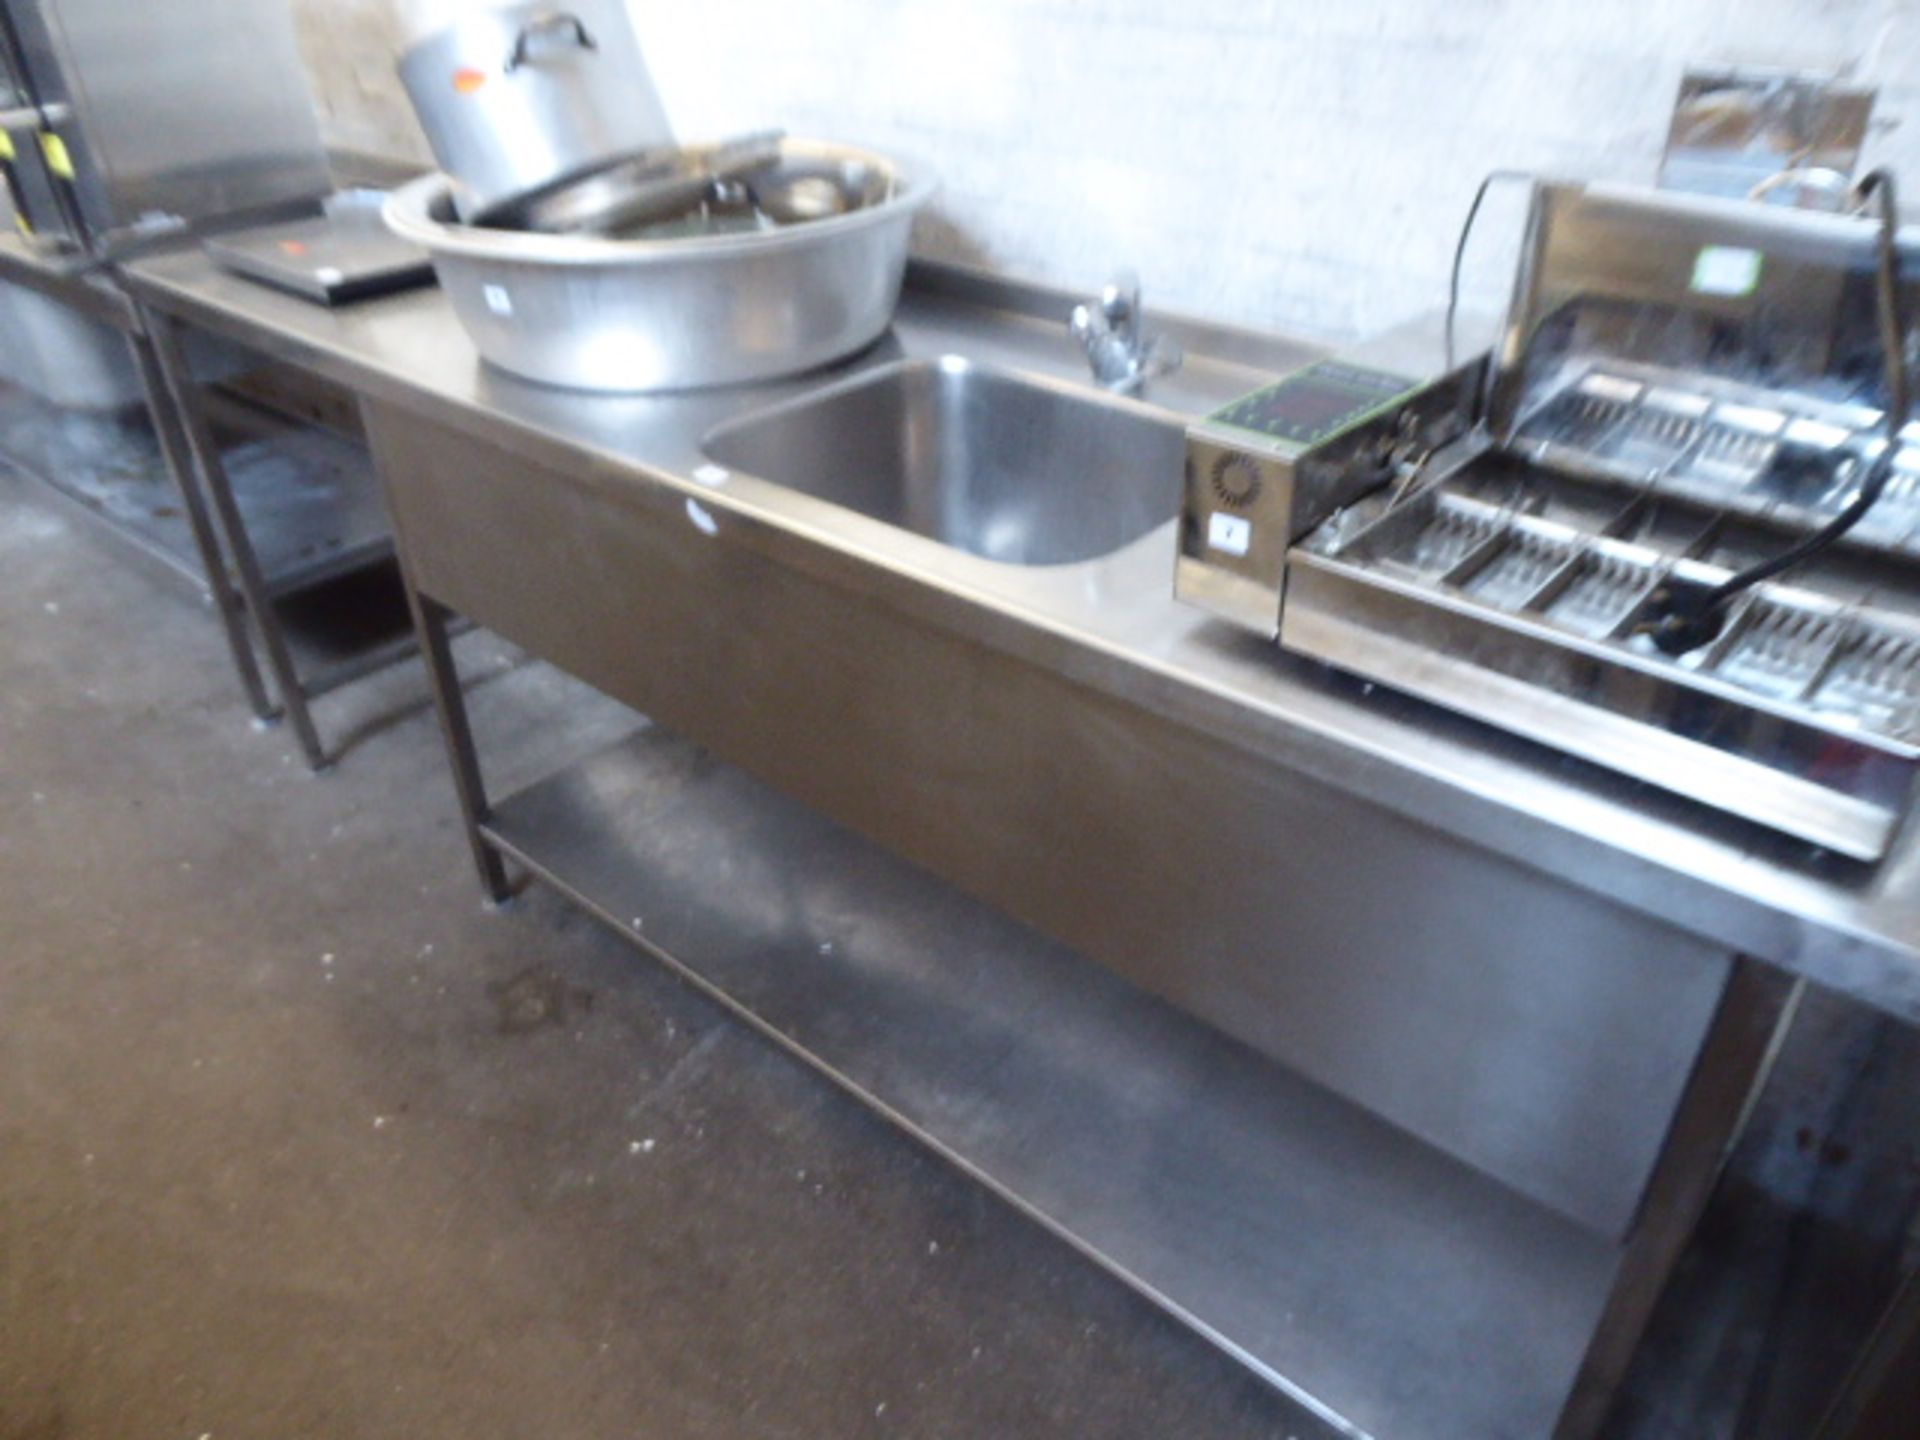 240cm stainless steel single bowl sink with taps, draining board and shelf under